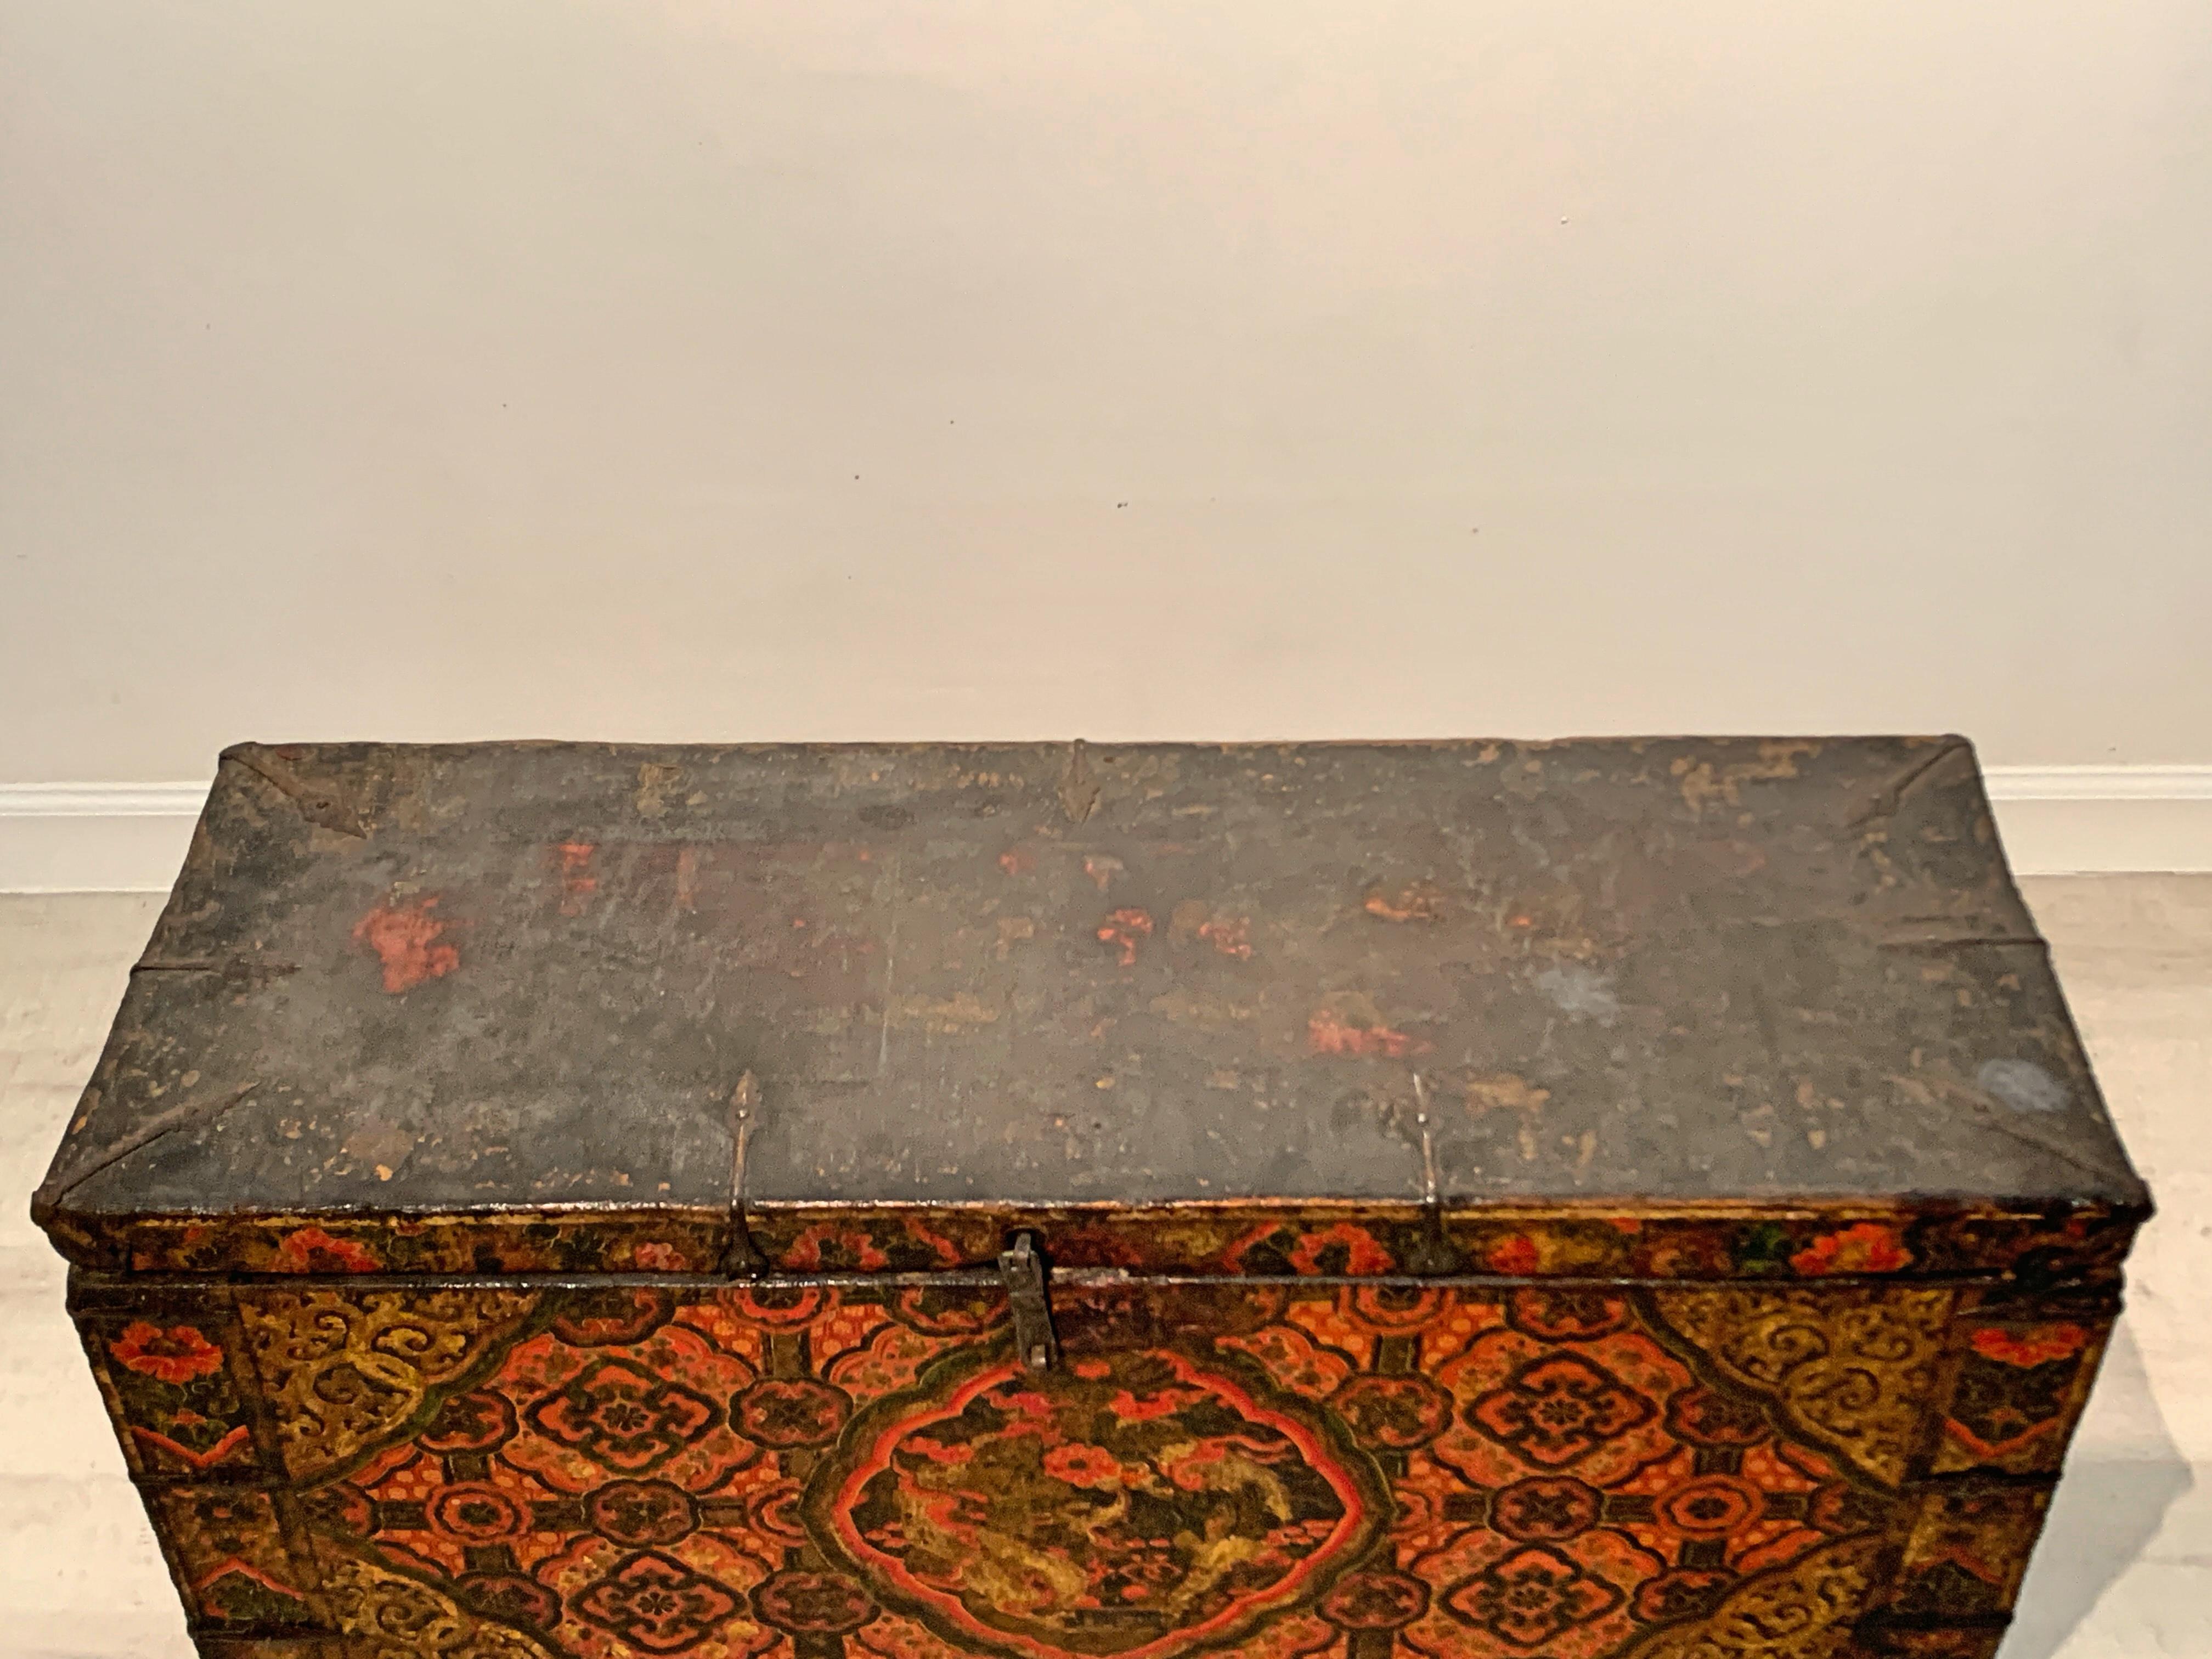 Tibetan Painted Trunk with Dragon and Brocade Design, 17th-18th Century, Tibet 12